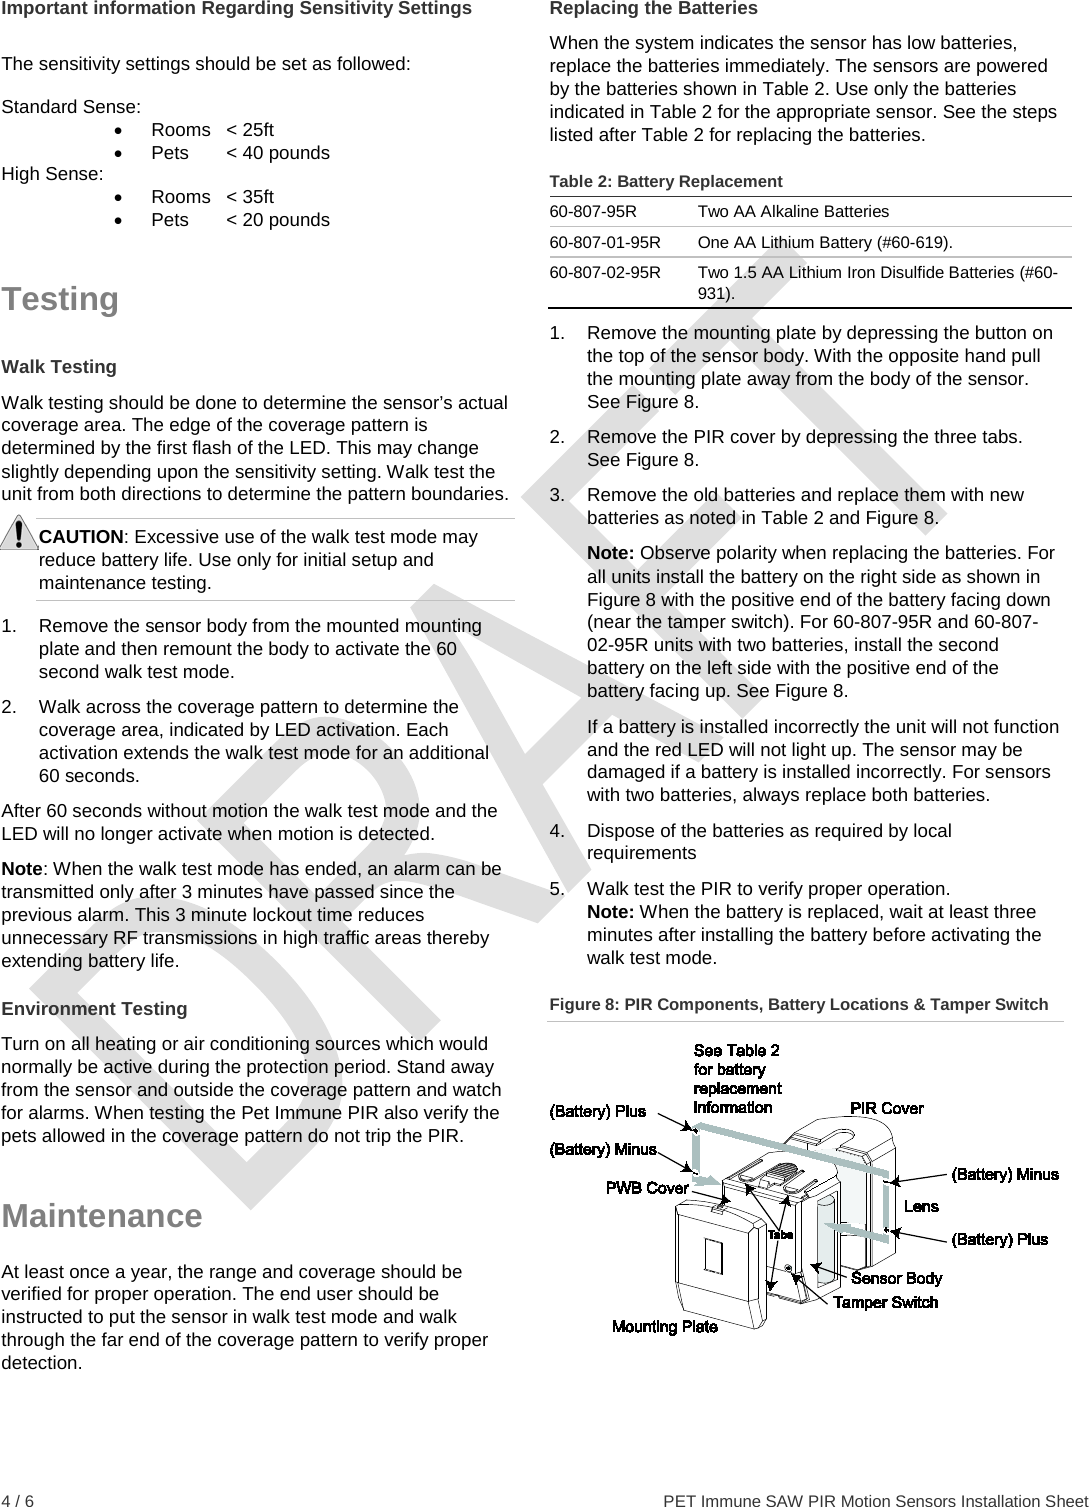  4 / 6    PET Immune SAW PIR Motion Sensors Installation Sheet Important information Regarding Sensitivity Settings  The sensitivity settings should be set as followed:  Standard Sense: • Rooms &lt; 25ft •  Pets   &lt; 40 pounds High Sense: • Rooms &lt; 35ft •  Pets   &lt; 20 pounds Testing Walk Testing Walk testing should be done to determine the sensor’s actual coverage area. The edge of the coverage pattern is determined by the first flash of the LED. This may change slightly depending upon the sensitivity setting. Walk test the unit from both directions to determine the pattern boundaries. CAUTION: Excessive use of the walk test mode may reduce battery life. Use only for initial setup and maintenance testing. 1.  Remove the sensor body from the mounted mounting plate and then remount the body to activate the 60 second walk test mode. 2.  Walk across the coverage pattern to determine the coverage area, indicated by LED activation. Each activation extends the walk test mode for an additional 60 seconds. After 60 seconds without motion the walk test mode and the LED will no longer activate when motion is detected. Note: When the walk test mode has ended, an alarm can be transmitted only after 3 minutes have passed since the previous alarm. This 3 minute lockout time reduces unnecessary RF transmissions in high traffic areas thereby extending battery life. Environment Testing Turn on all heating or air conditioning sources which would normally be active during the protection period. Stand away from the sensor and outside the coverage pattern and watch for alarms. When testing the Pet Immune PIR also verify the pets allowed in the coverage pattern do not trip the PIR. Maintenance At least once a year, the range and coverage should be verified for proper operation. The end user should be instructed to put the sensor in walk test mode and walk through the far end of the coverage pattern to verify proper detection. Replacing the Batteries When the system indicates the sensor has low batteries, replace the batteries immediately. The sensors are powered by the batteries shown in Table 2. Use only the batteries indicated in Table 2 for the appropriate sensor. See the steps listed after Table 2 for replacing the batteries. Table 2: Battery Replacement 60-807-95R Two AA Alkaline Batteries 60-807-01-95R One AA Lithium Battery (#60-619). 60-807-02-95R Two 1.5 AA Lithium Iron Disulfide Batteries (#60-931). 1. Remove the mounting plate by depressing the button on the top of the sensor body. With the opposite hand pull the mounting plate away from the body of the sensor. See Figure 8. 2. Remove the PIR cover by depressing the three tabs. See Figure 8. 3. Remove the old batteries and replace them with new batteries as noted in Table 2 and Figure 8. Note: Observe polarity when replacing the batteries. For all units install the battery on the right side as shown in Figure 8 with the positive end of the battery facing down (near the tamper switch). For 60-807-95R and 60-807-02-95R units with two batteries, install the second battery on the left side with the positive end of the battery facing up. See Figure 8.  If a battery is installed incorrectly the unit will not function and the red LED will not light up. The sensor may be damaged if a battery is installed incorrectly. For sensors with two batteries, always replace both batteries.  4. Dispose of the batteries as required by local requirements 5. Walk test the PIR to verify proper operation.  Note: When the battery is replaced, wait at least three minutes after installing the battery before activating the walk test mode. Figure 8: PIR Components, Battery Locations &amp; Tamper Switch   